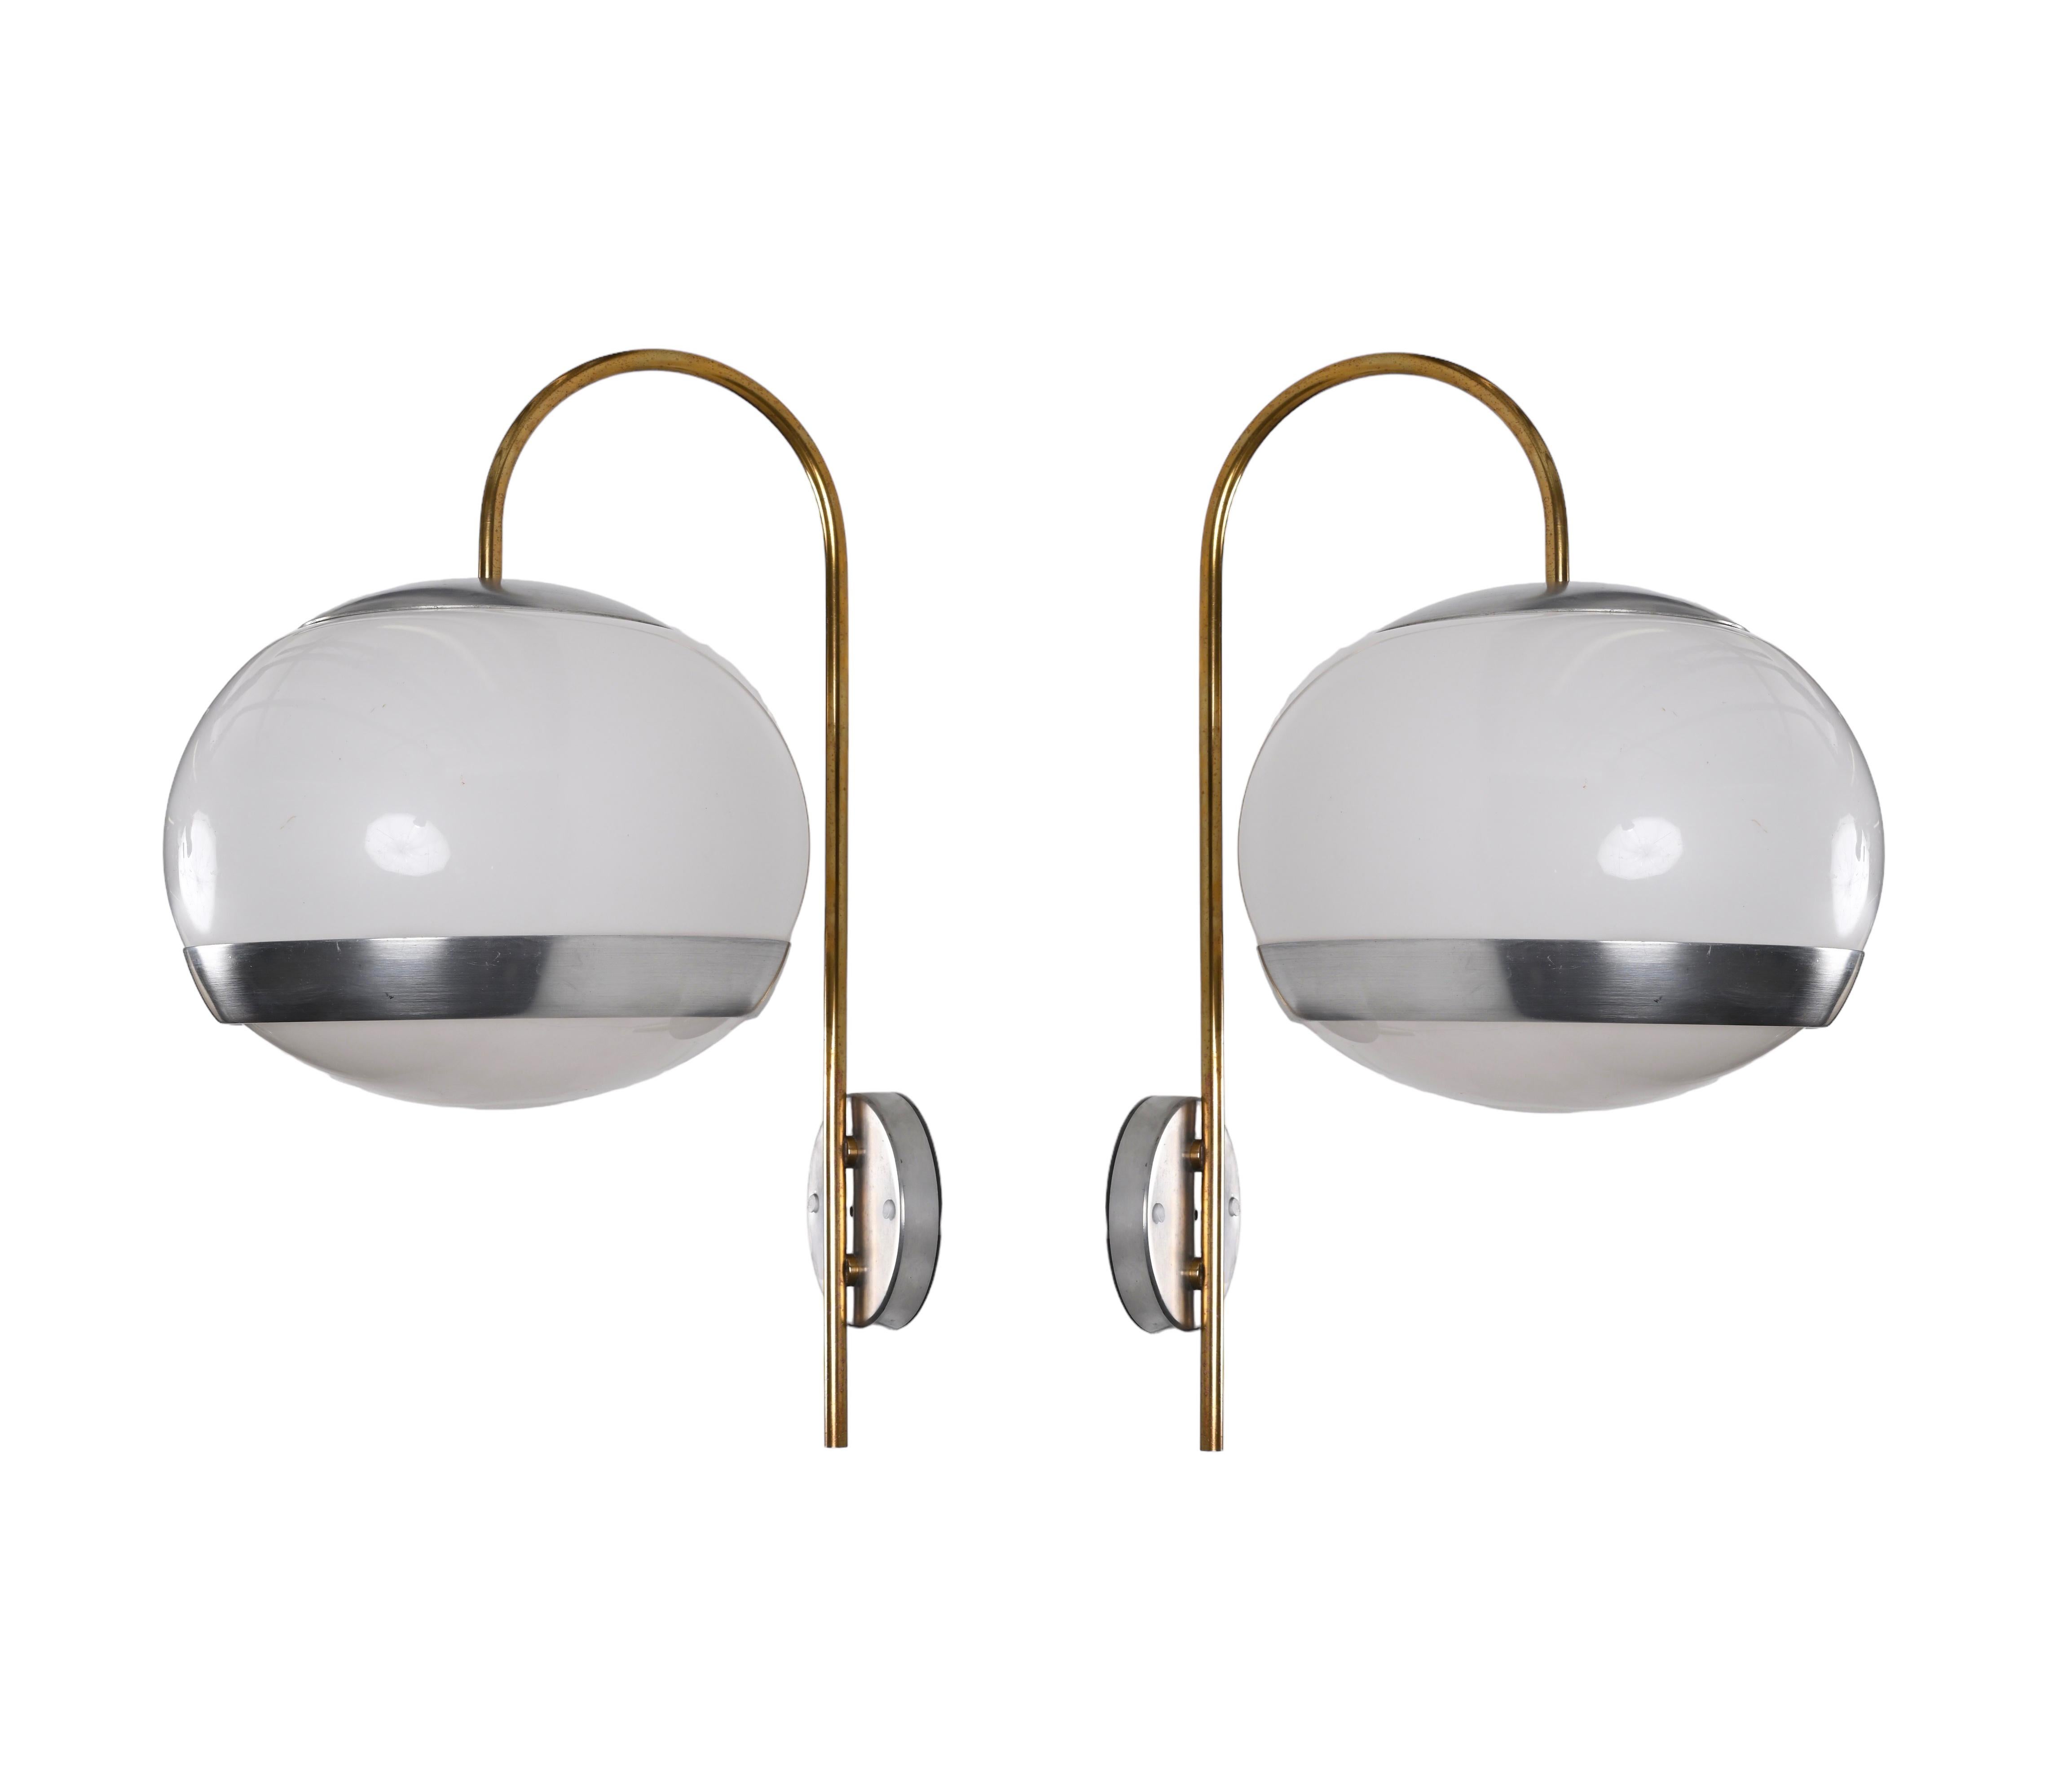 Pair of Stilux Sconces White Lucite and Brass, Italian Lighting, 1970s For Sale 3